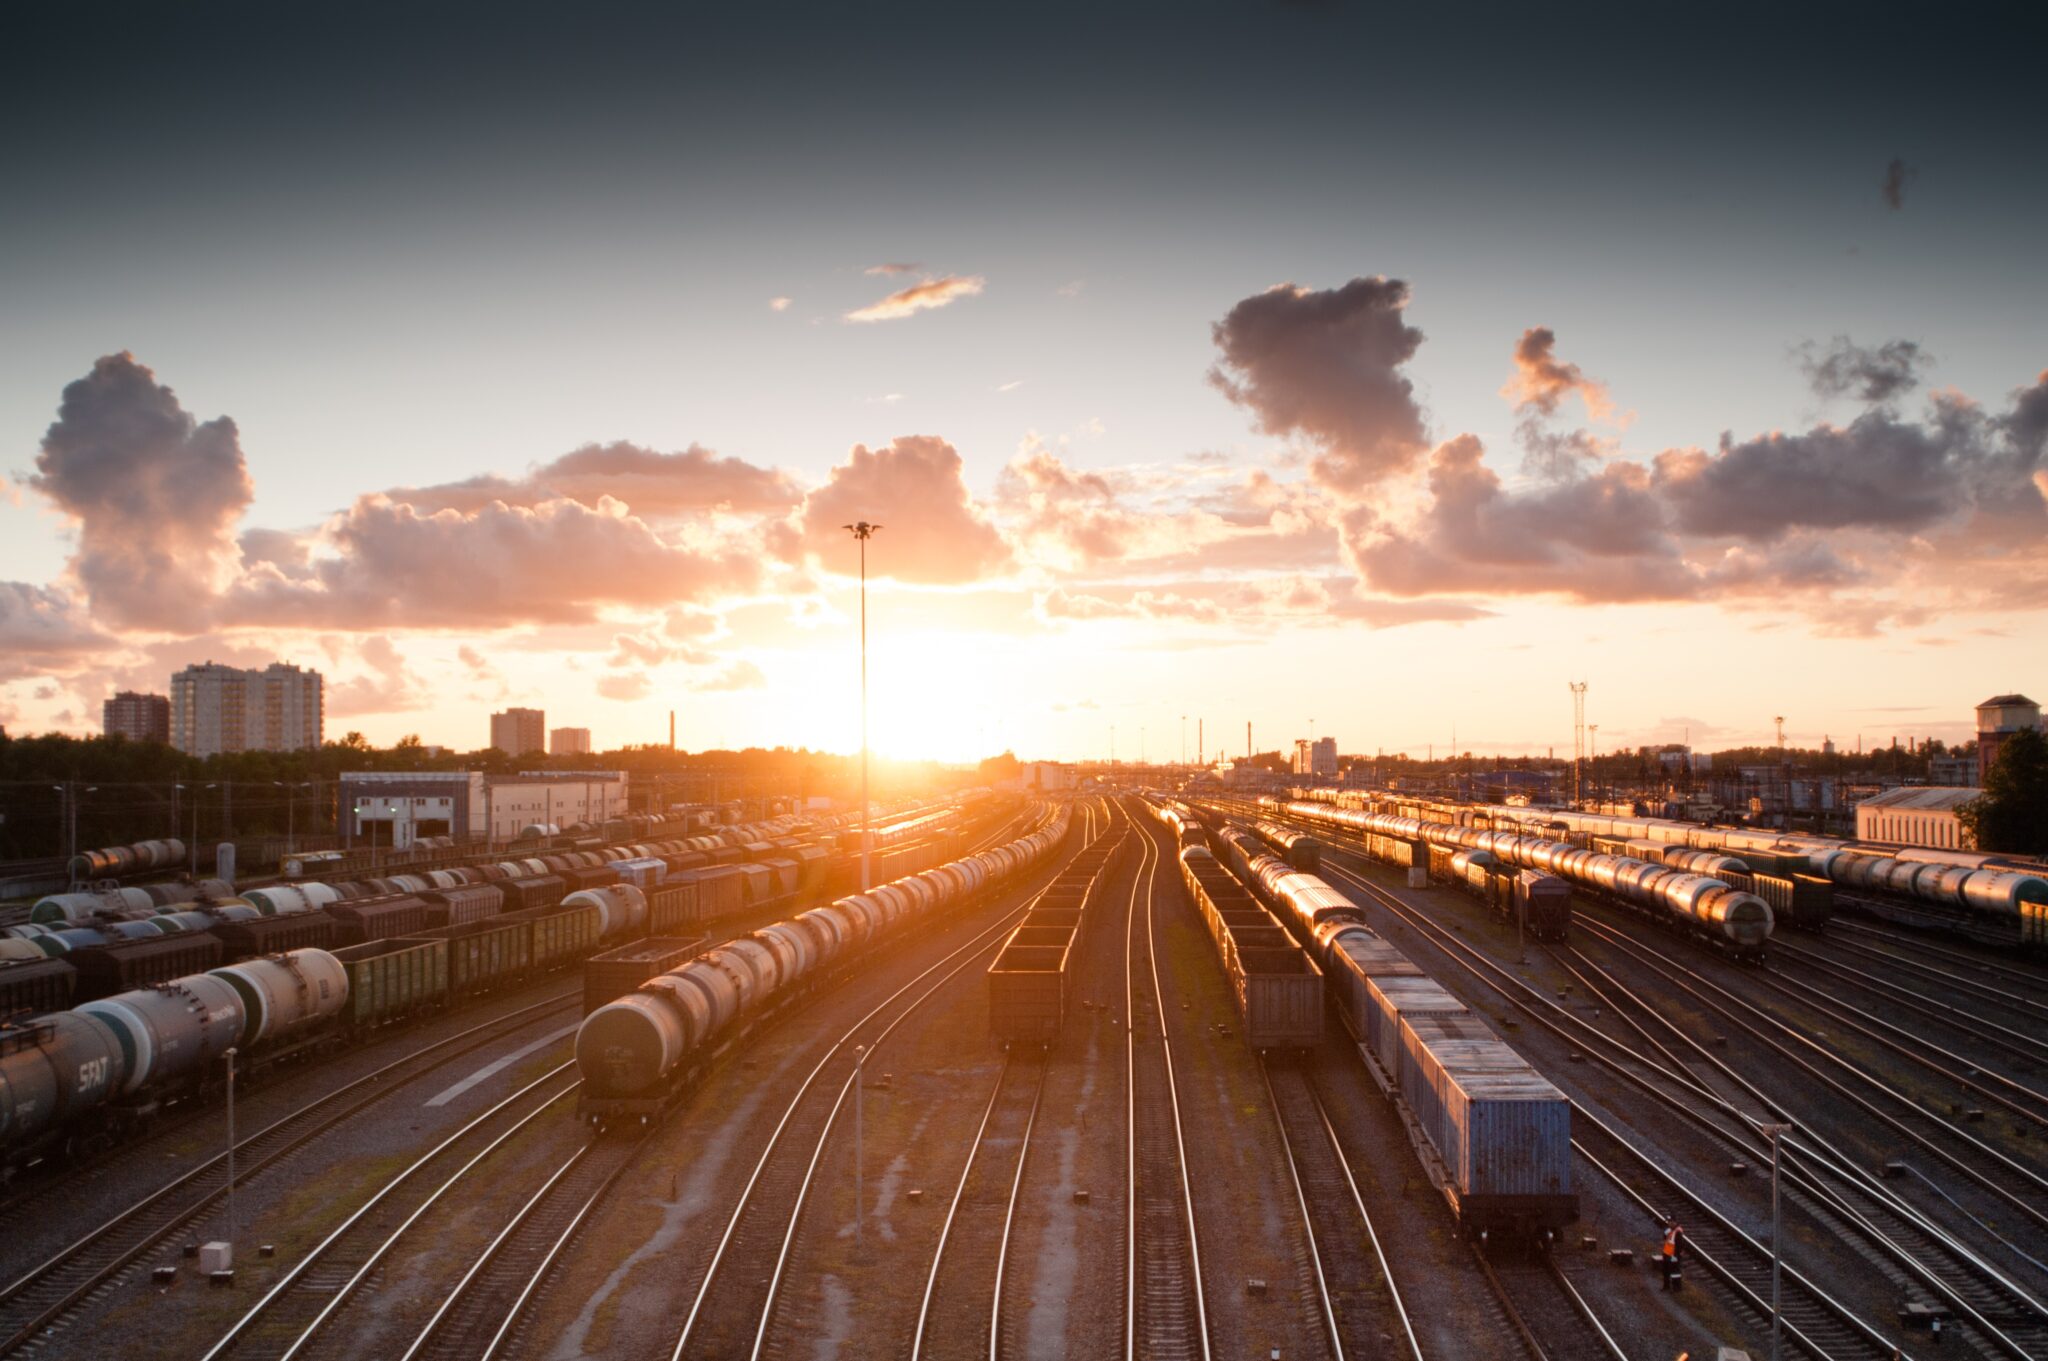 trains on tracks during sunset